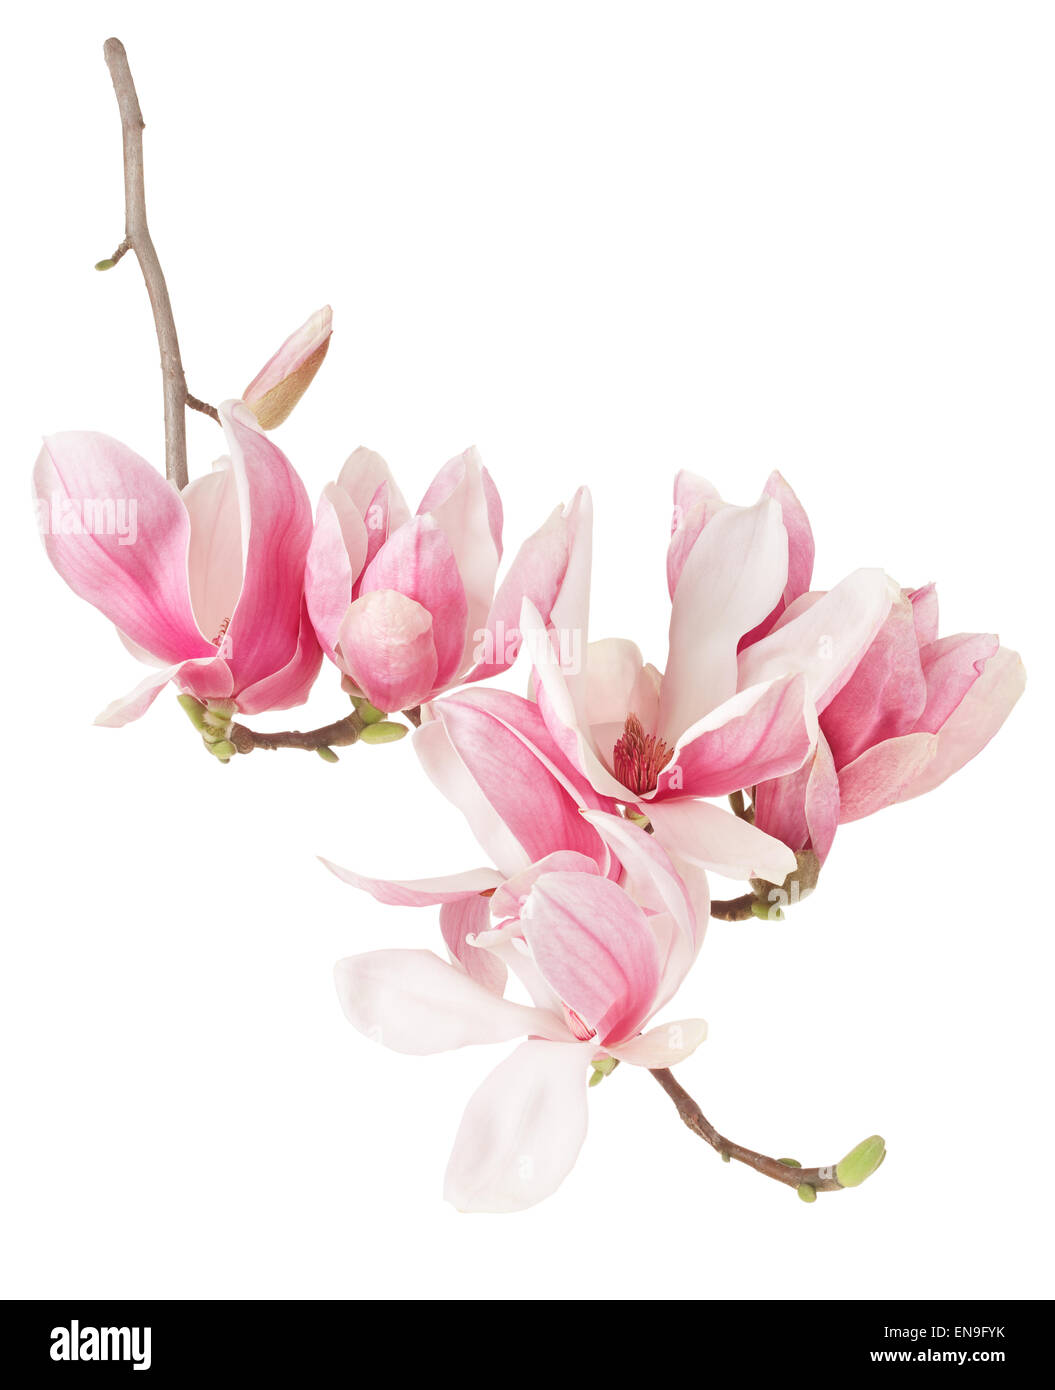 Magnolia, spring pink flower branch and buds Stock Photo